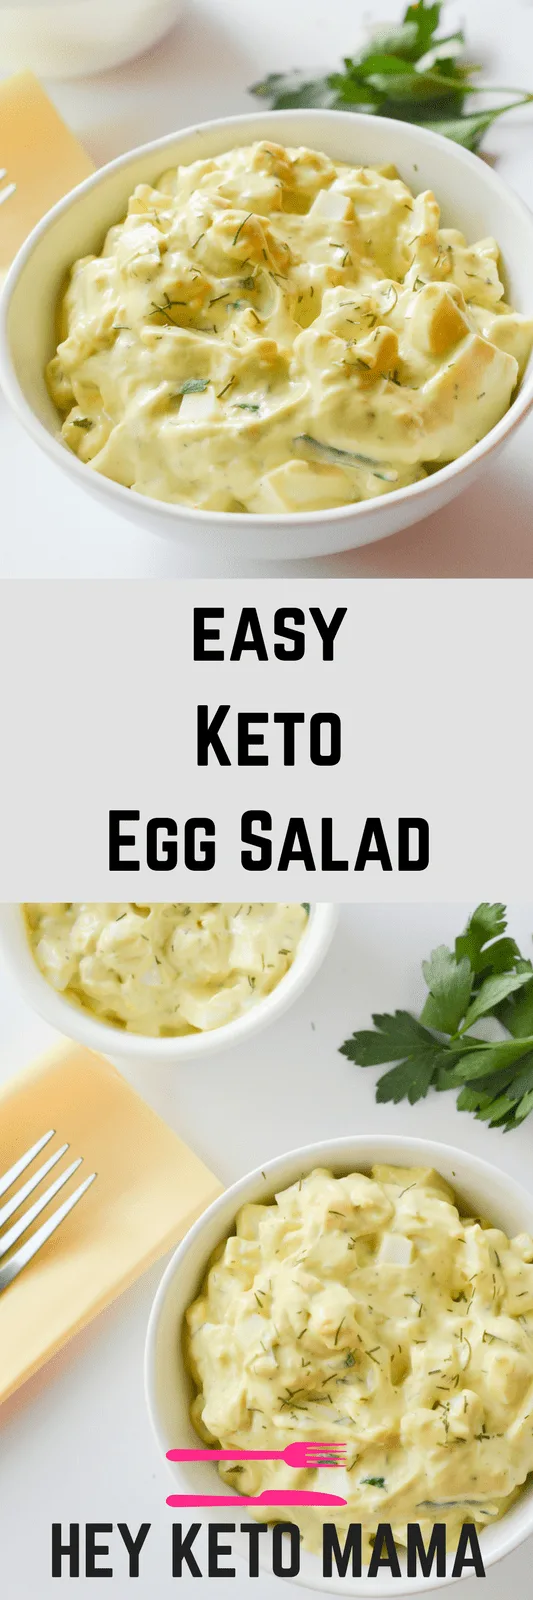 This easy keto egg salad is a quick and healthy low carb lunch with plenty of protein and delicious flavor! | heyketomama.com